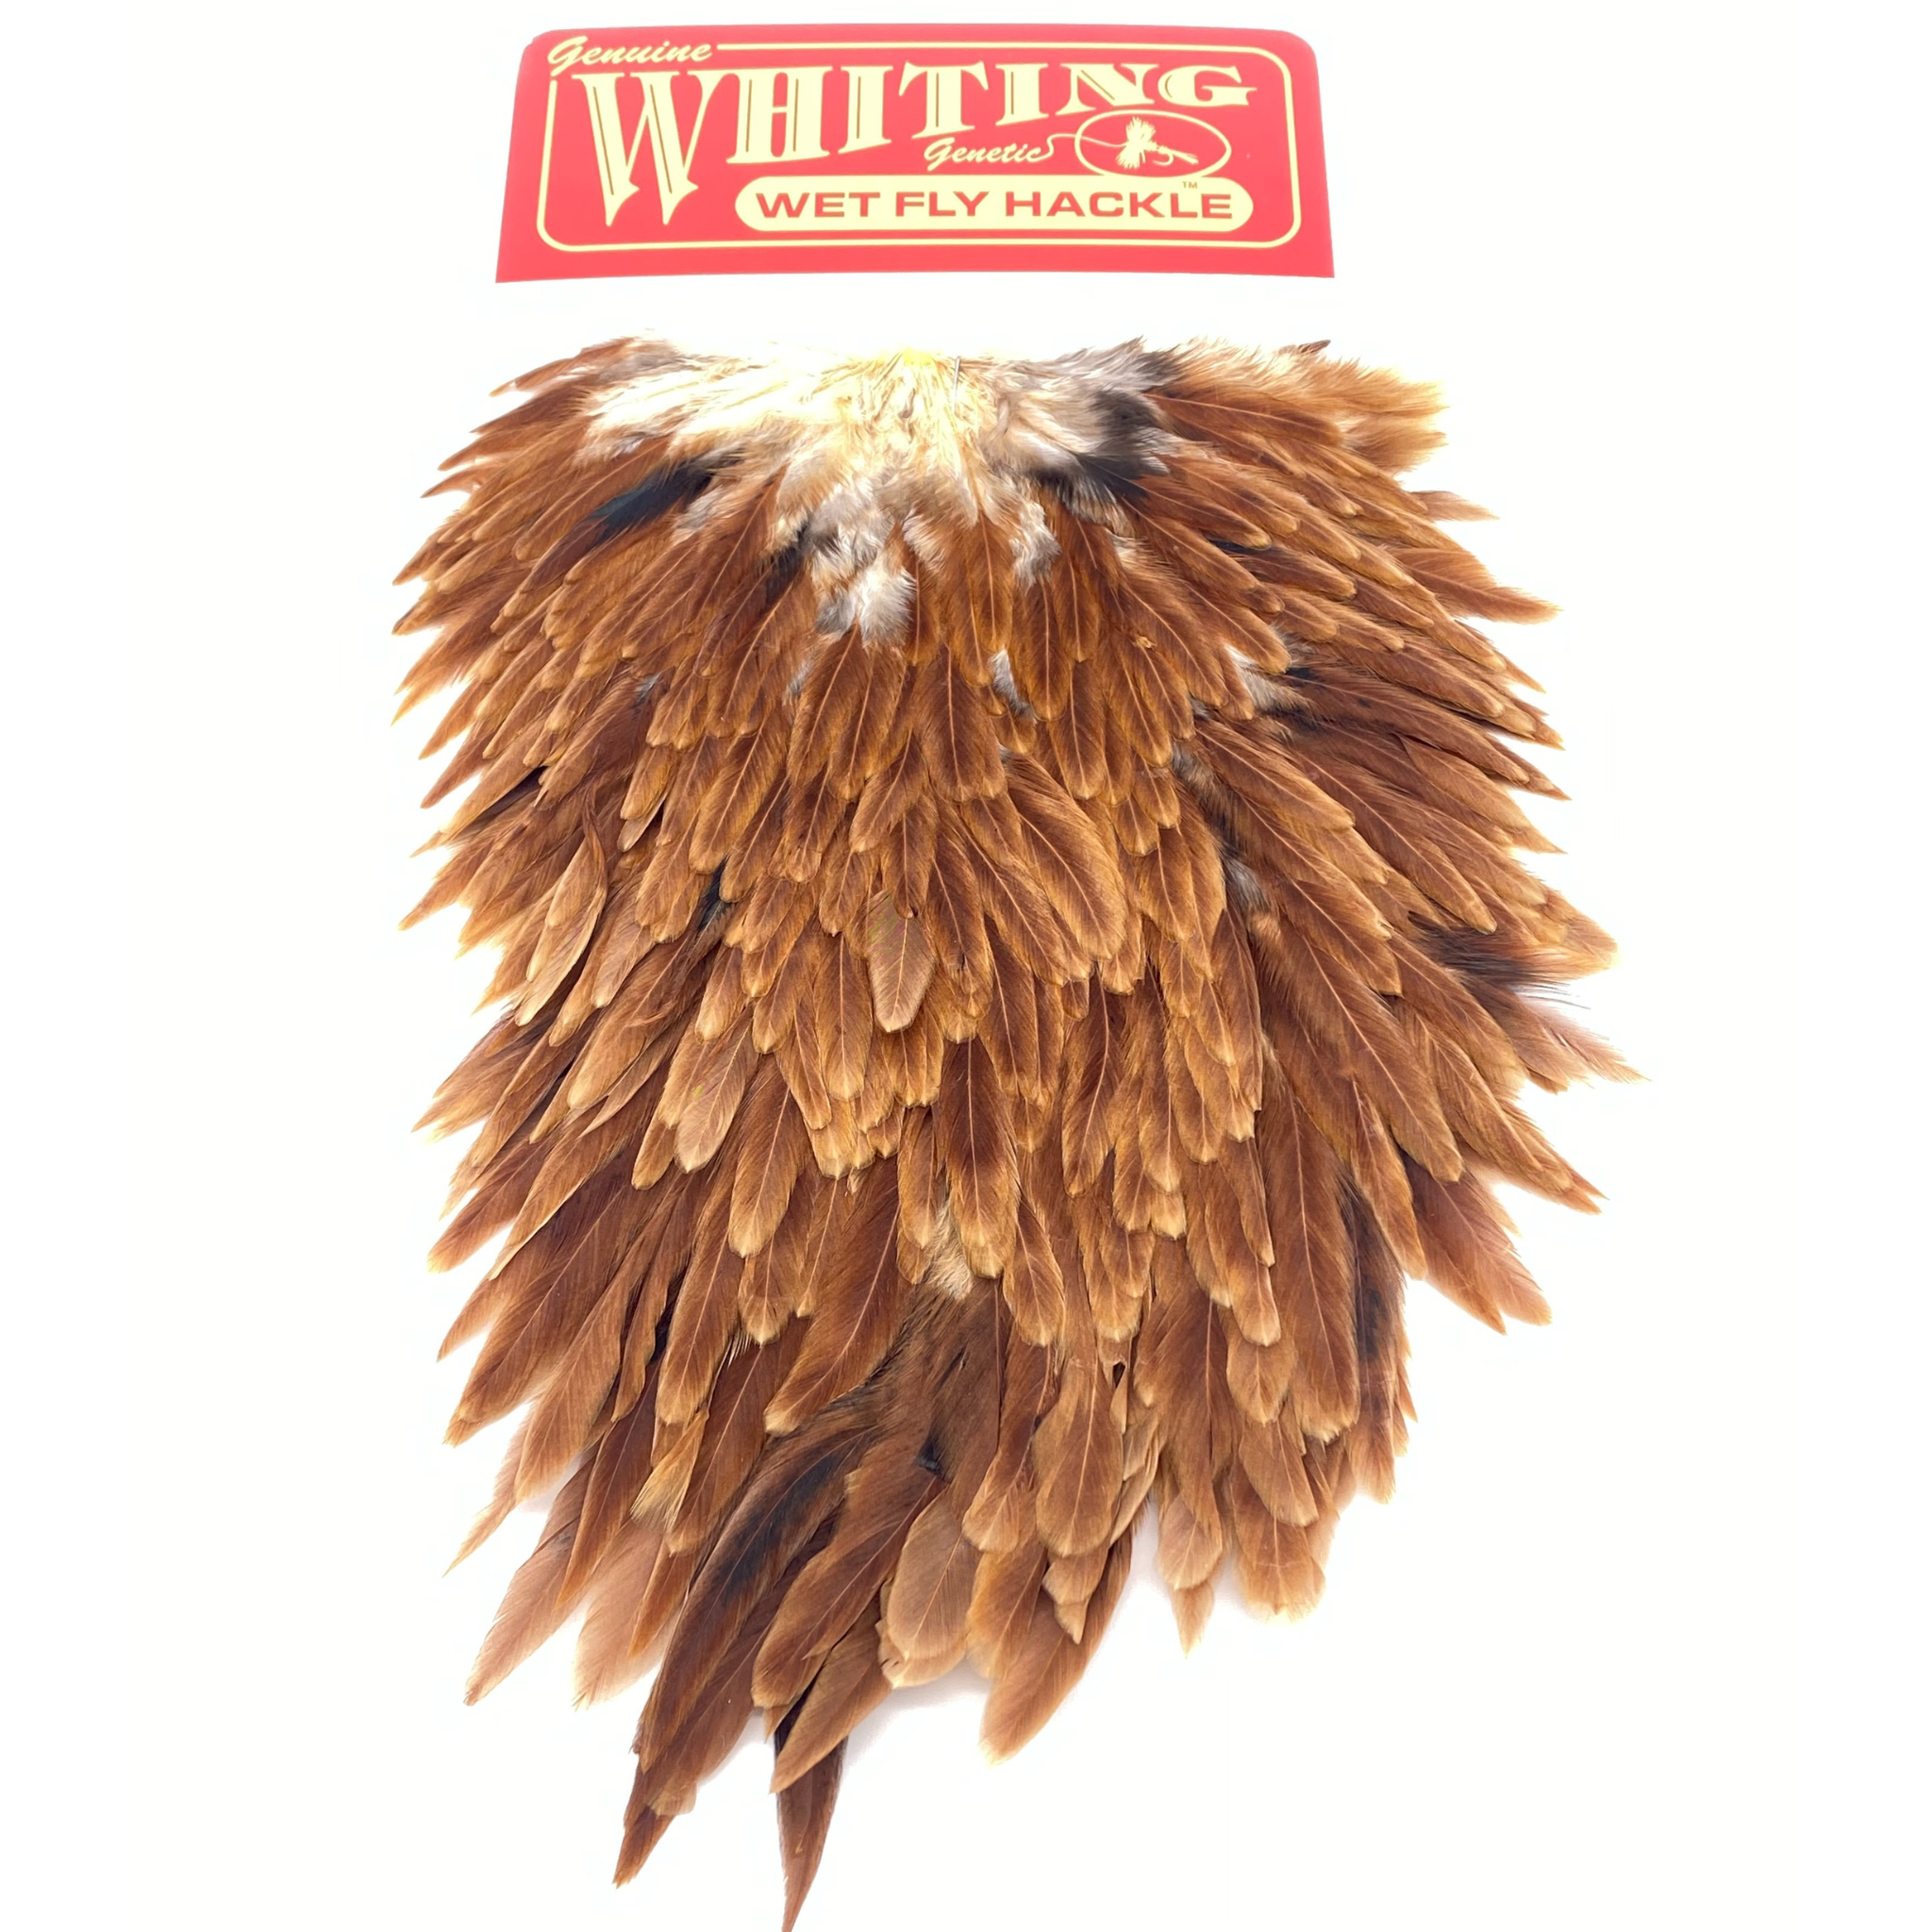 Whiting Hen Saddle - ( WHITING FARMS, INC)